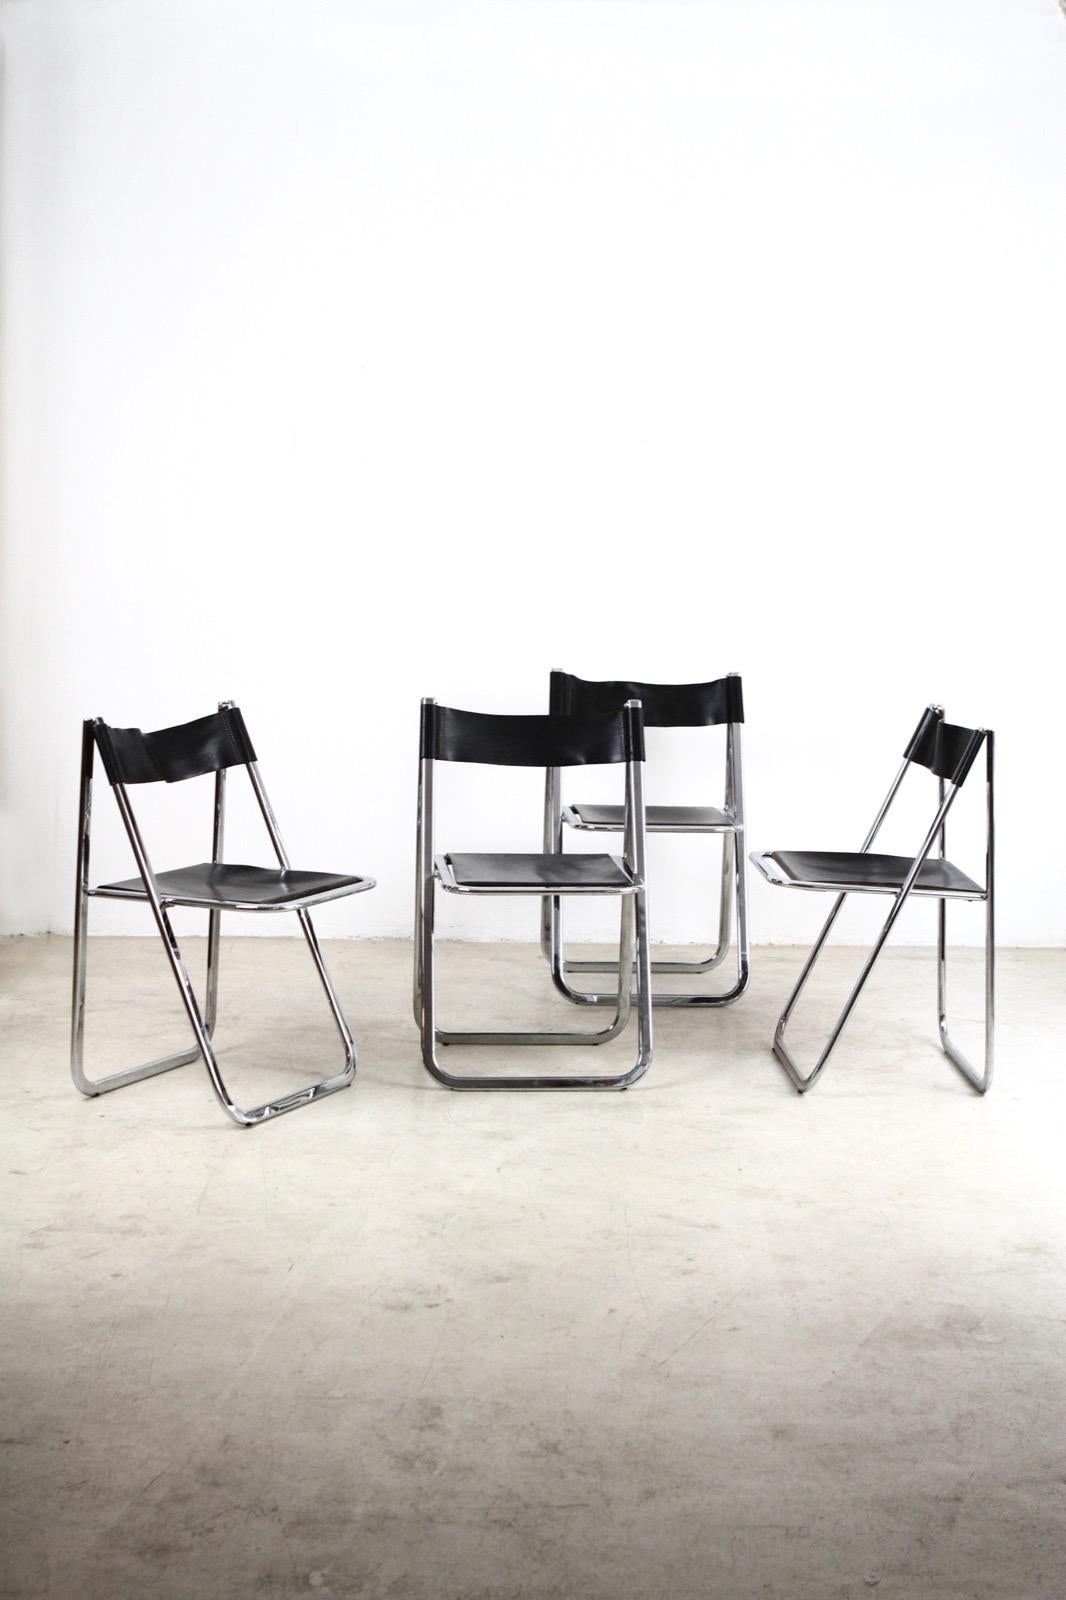 These Tamara folding chairs by Italian maker Arrben are the quintessential example of the form in split leather and chrome-plated steel polished to a mirror finish. We call them 